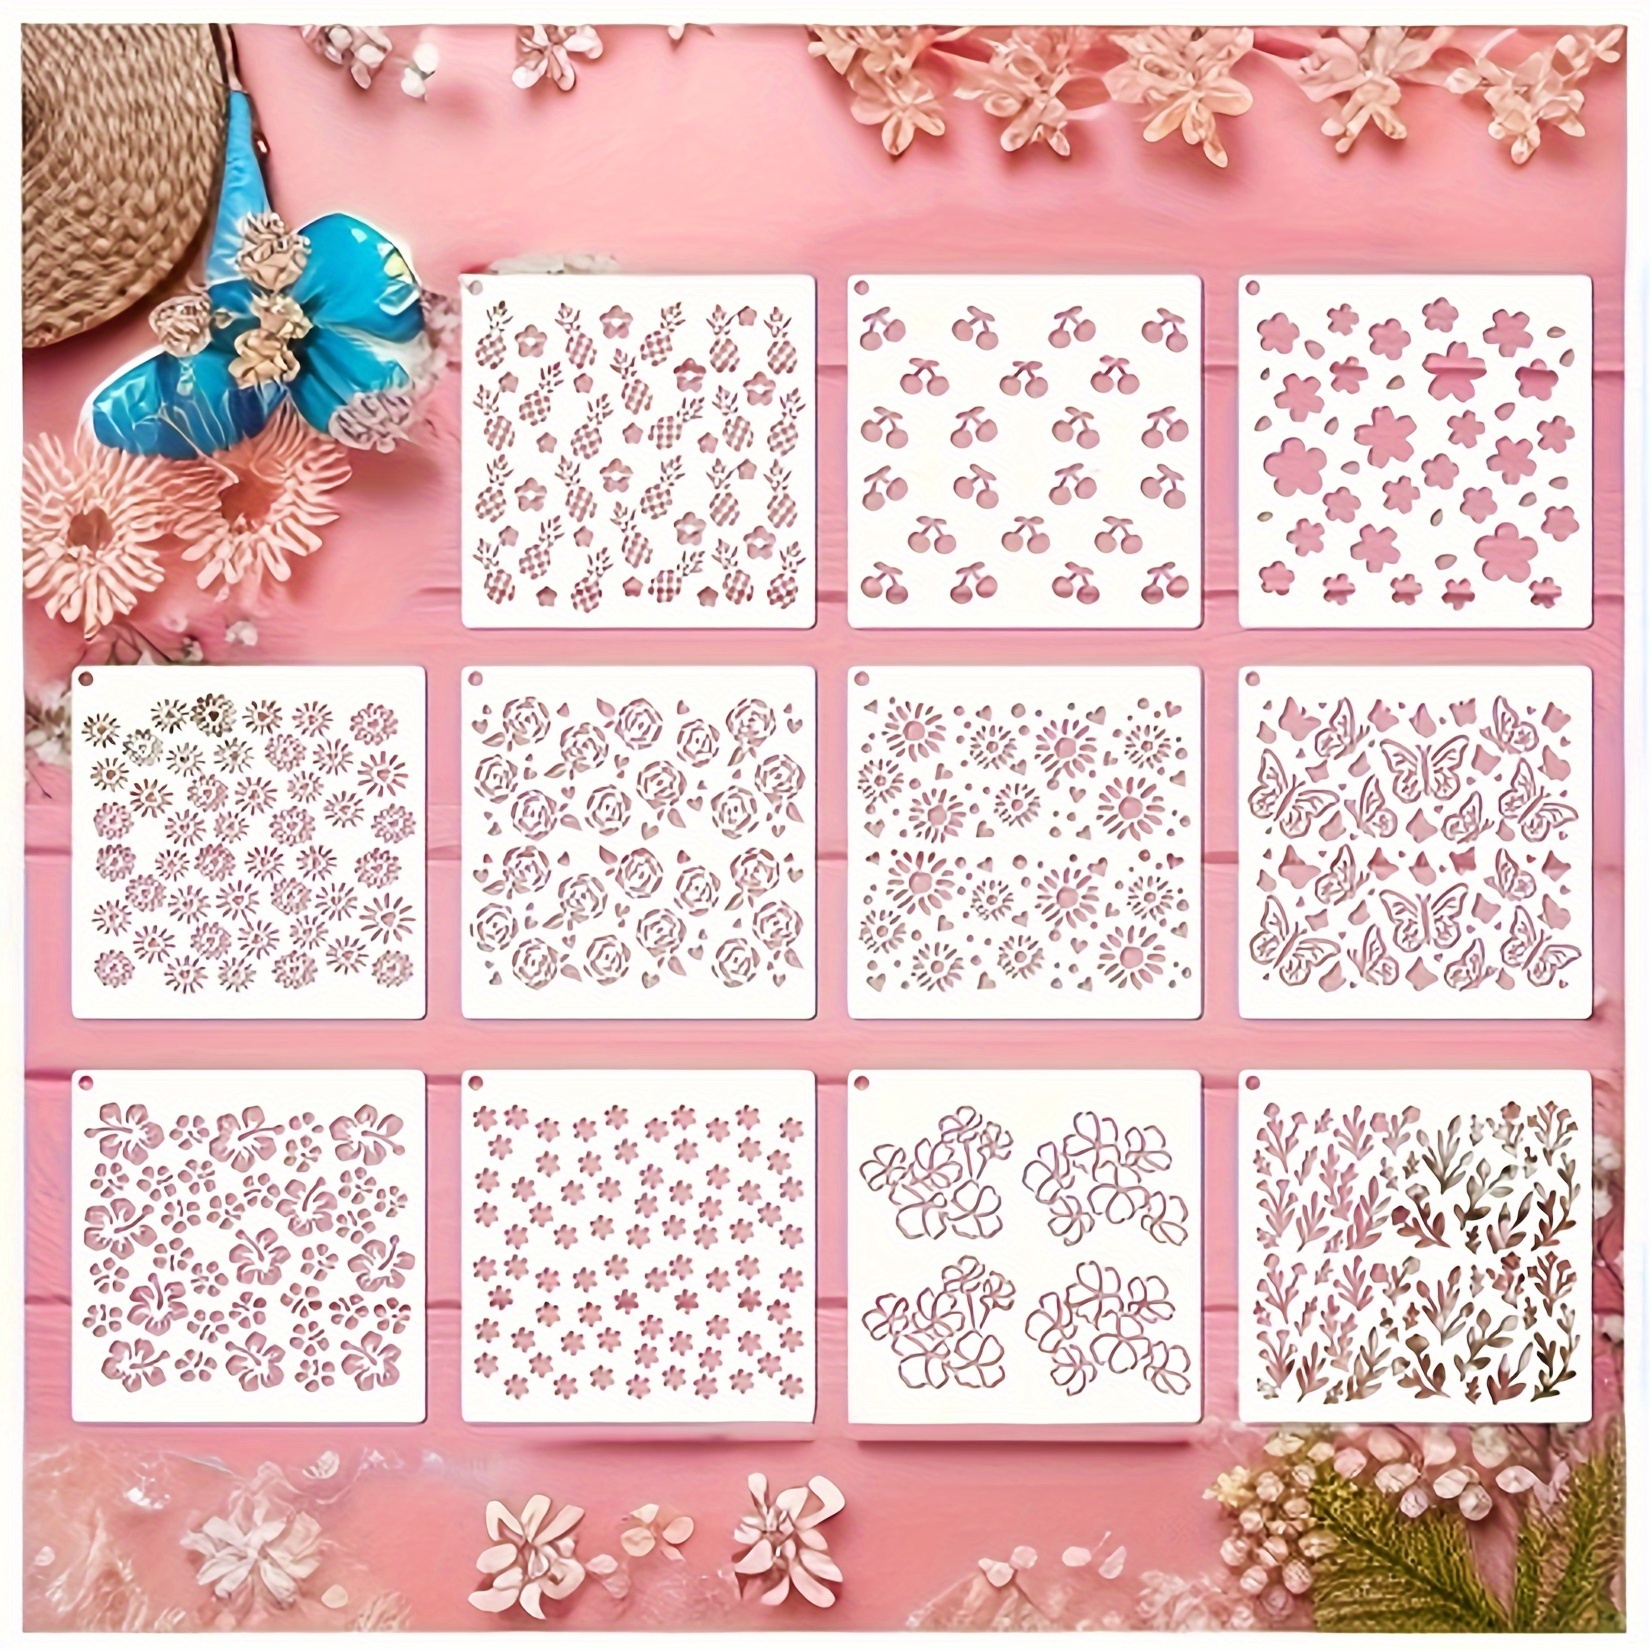  20PCS Cookie Stencils for Airbrushing, Royal Icing Stencils for Stencil  Genie Plaid Baking Stencils 5.5x5.5in Cookie Essential Stencils with Flower  Leavs Geometric Shapes for Biscuit Cake Coffee Decor : Home 